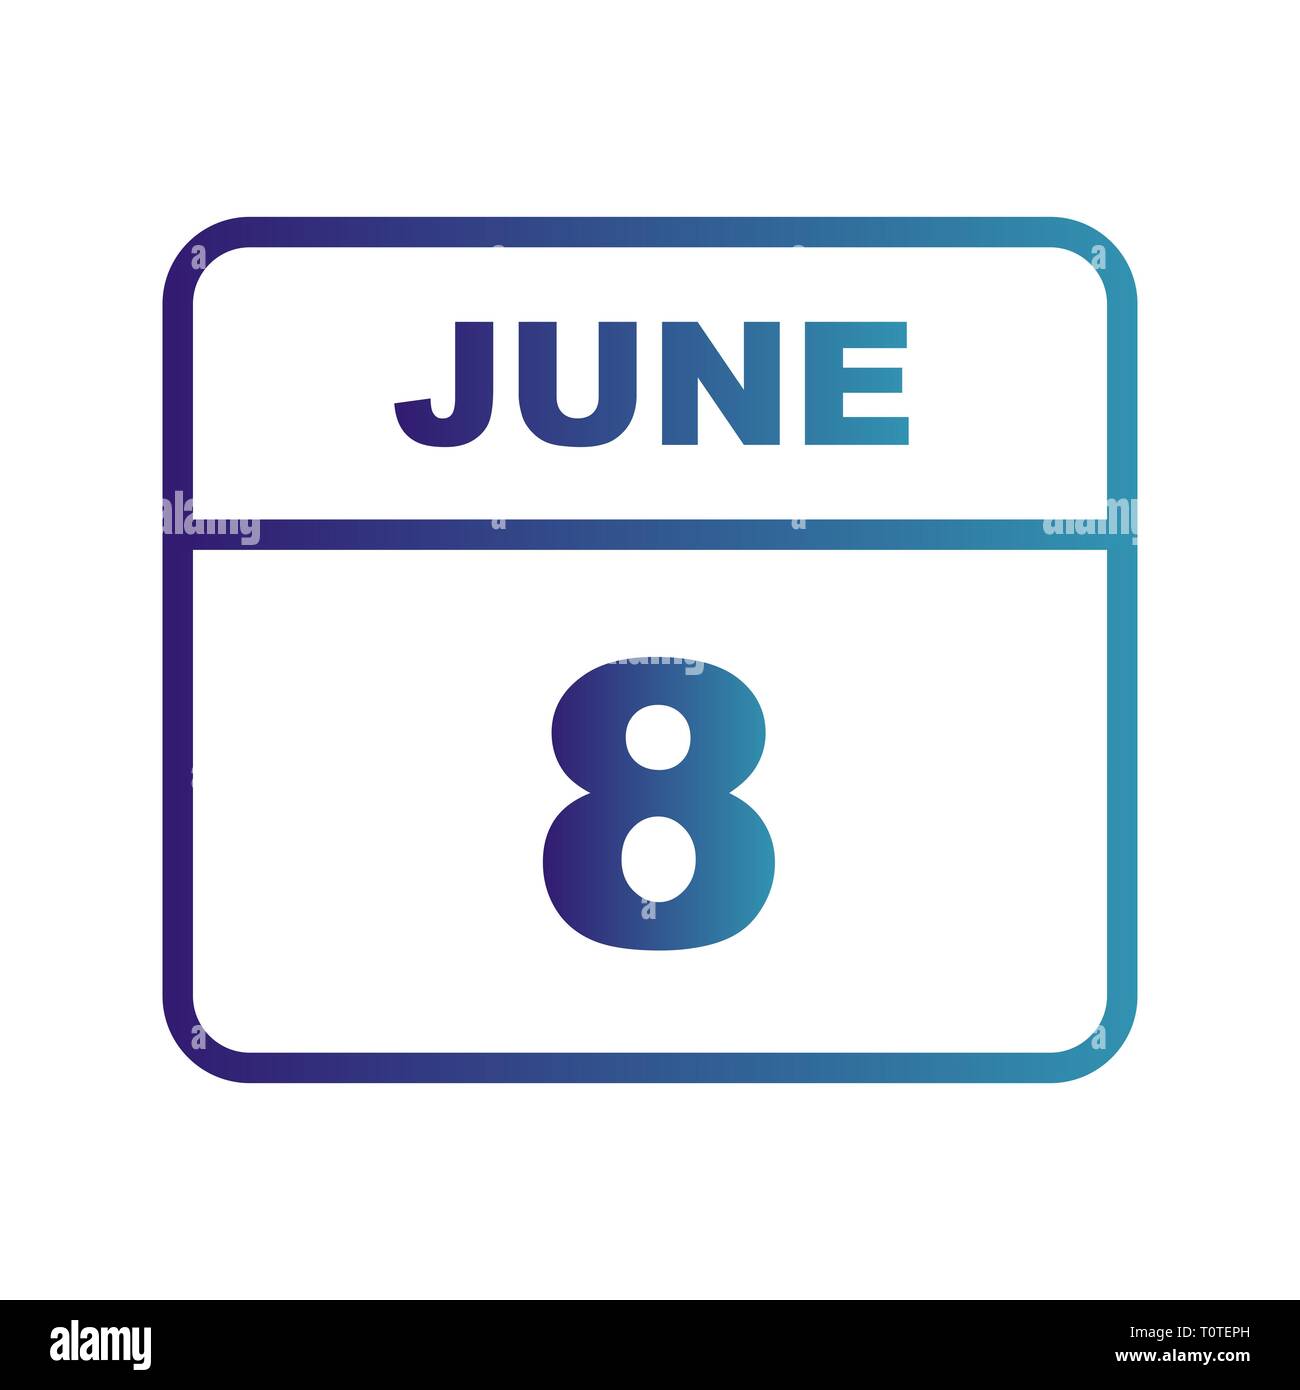 June 8th Date on a Single Day Calendar Stock Photo Alamy